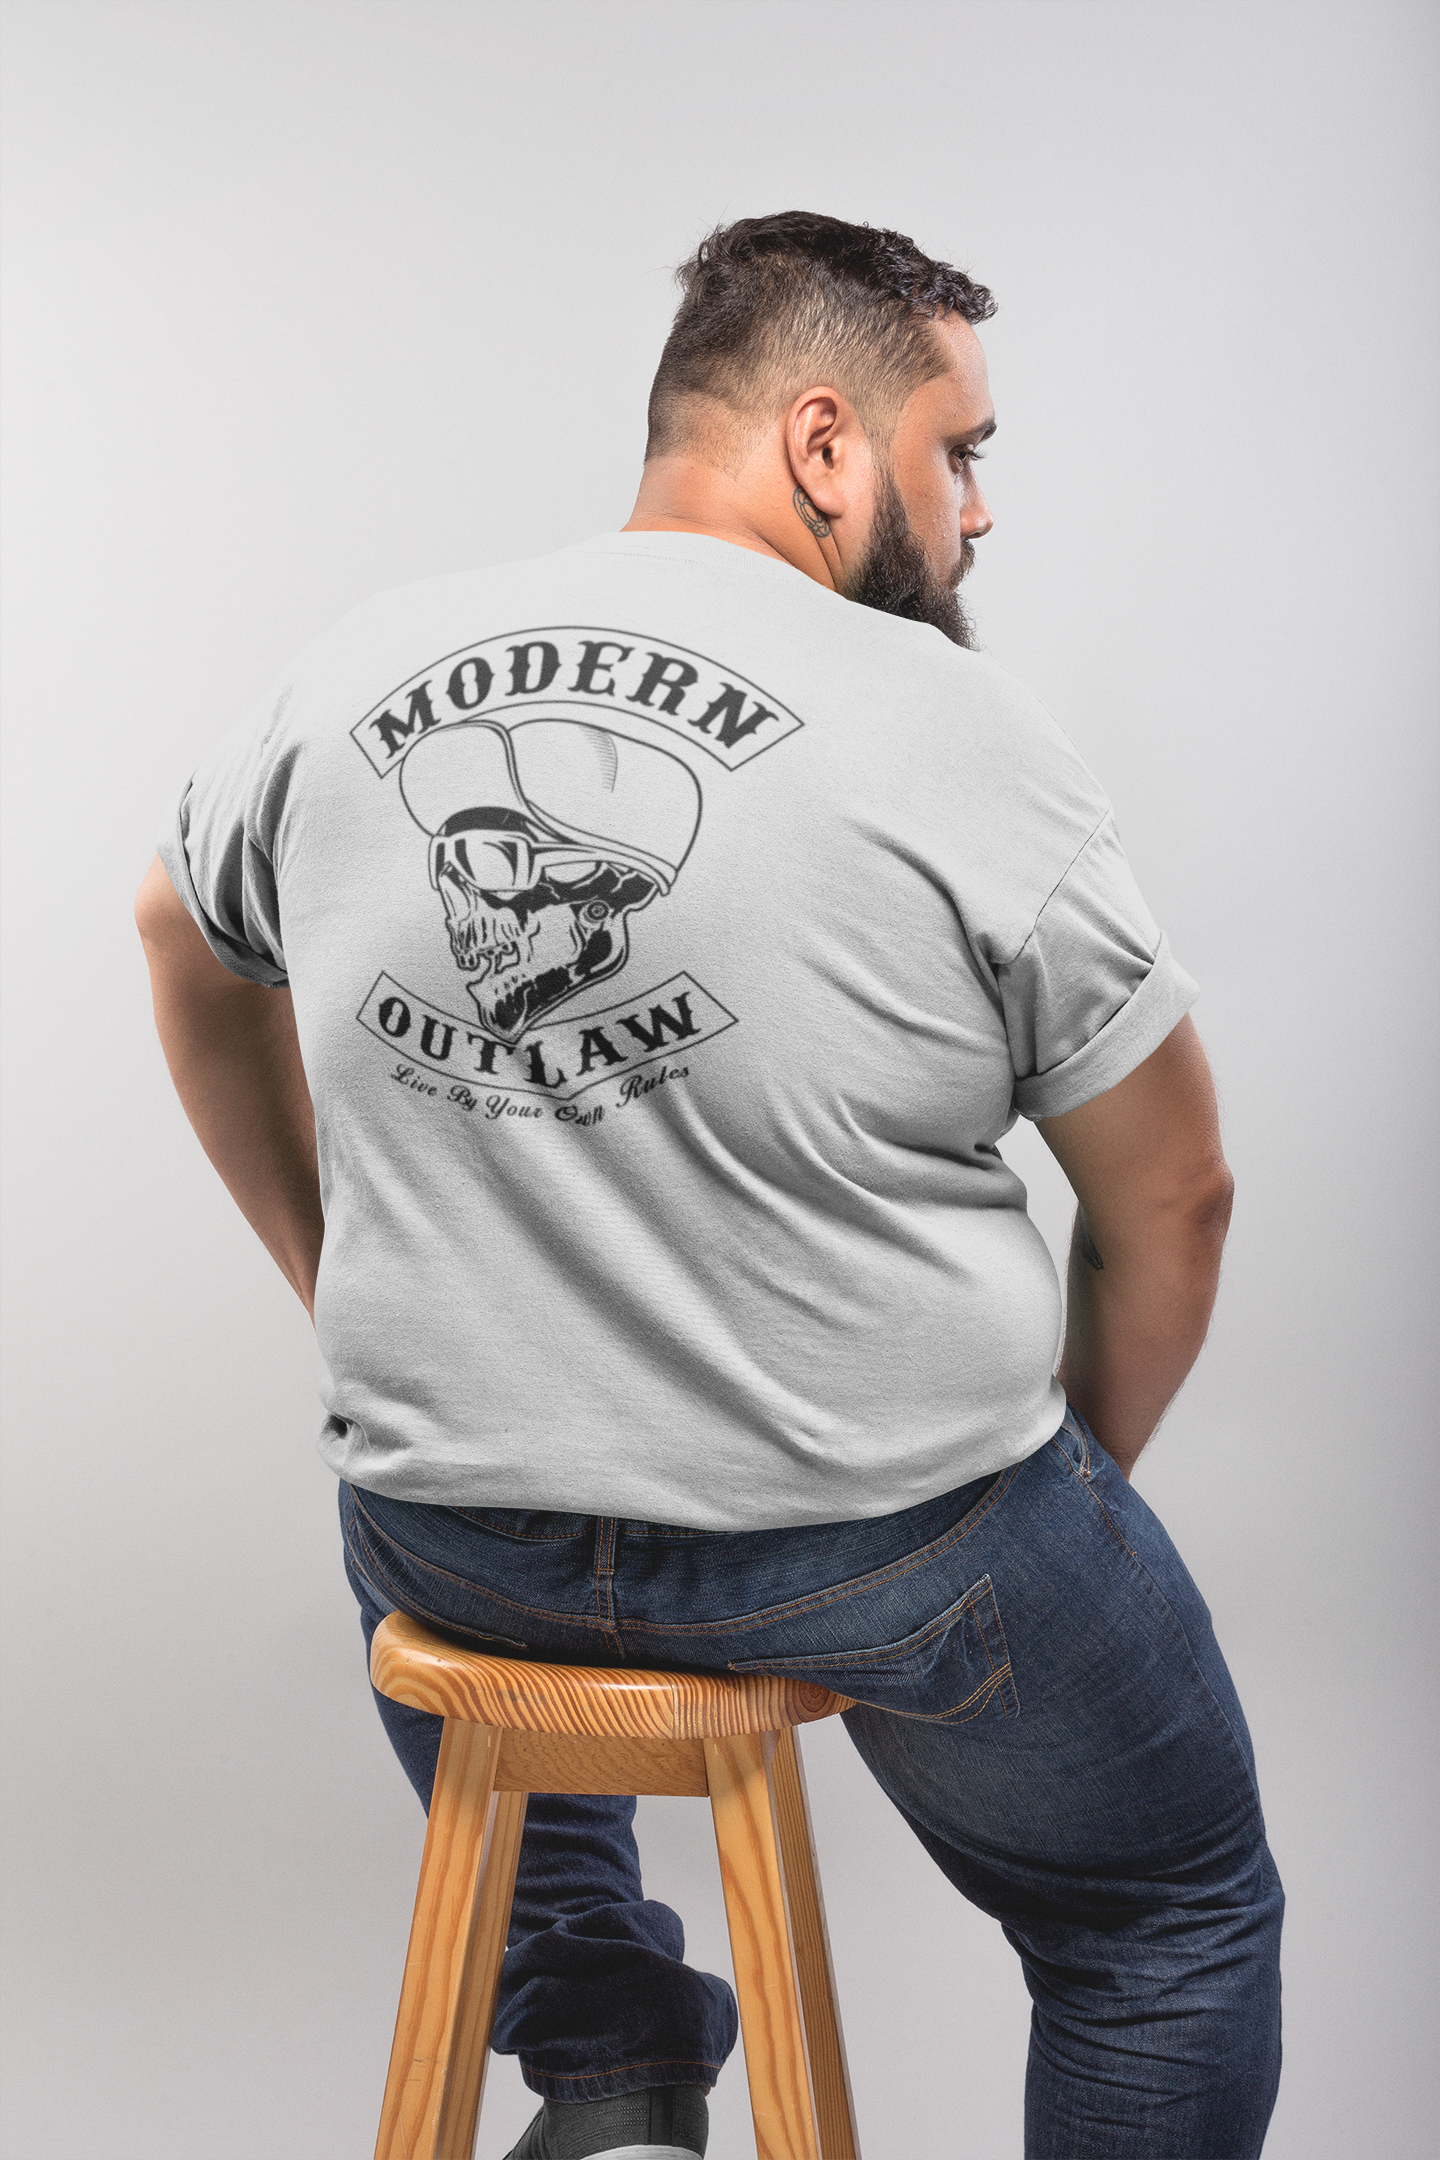 Modern Outlaw - Live by Your Own Rules - Dry Fit Short Sleeve Light Gray Shirt